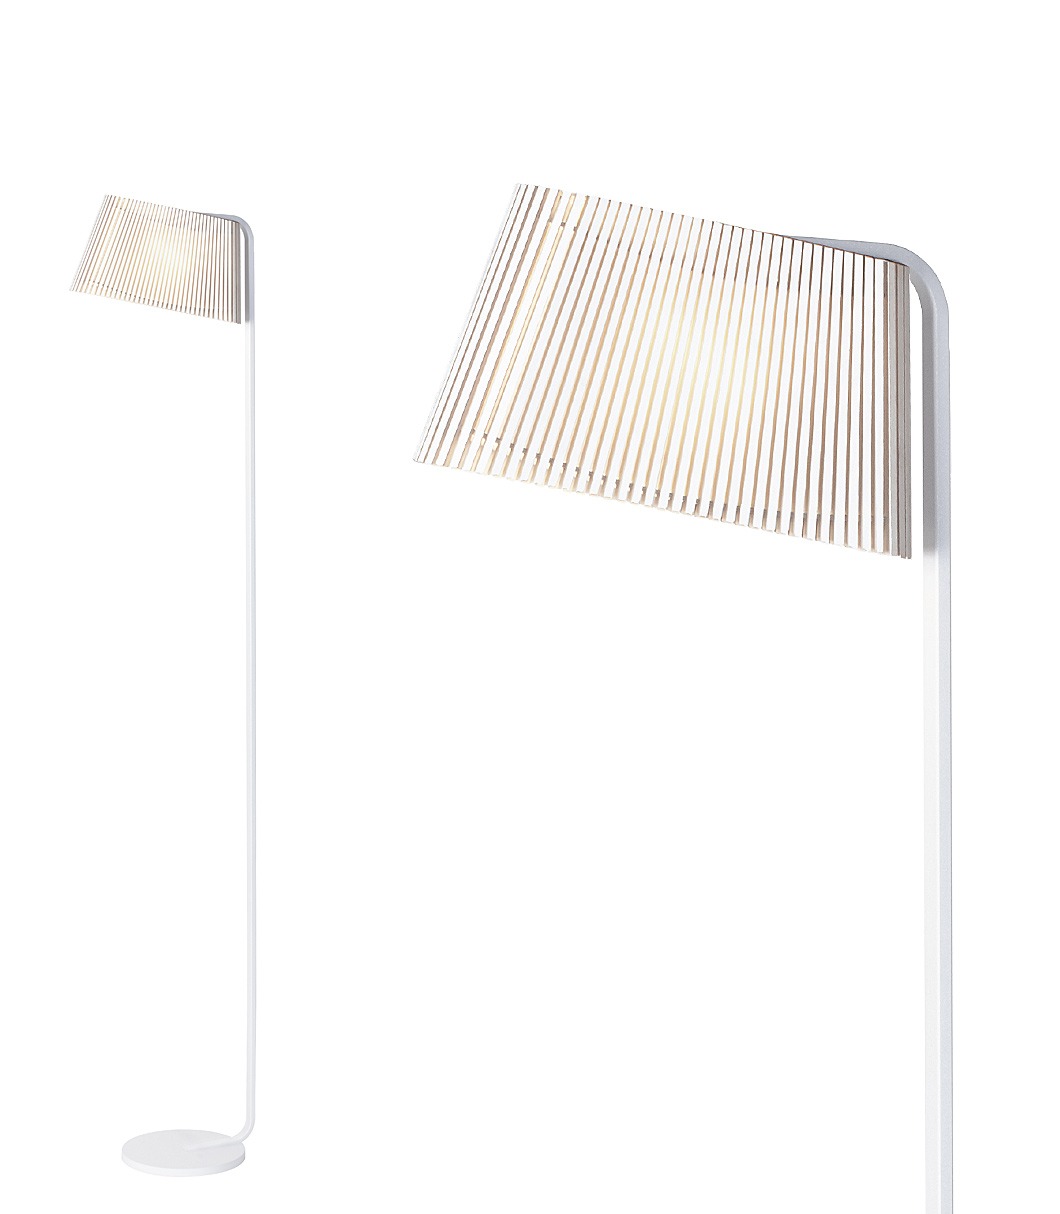 Owalo 7010 floor lamp is available in white laminated